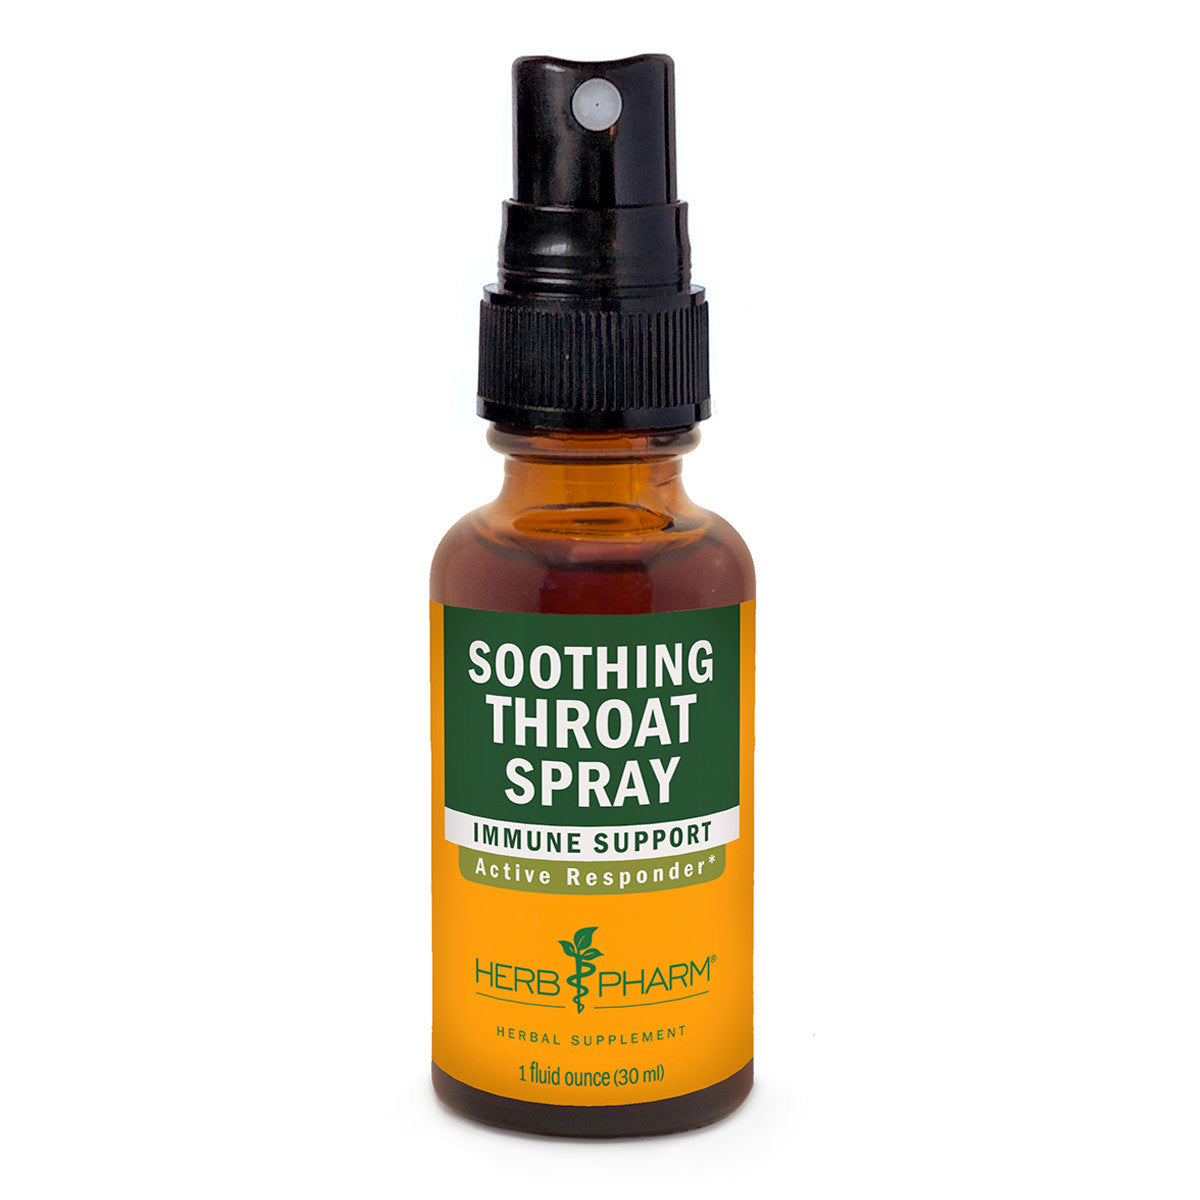 Primary image of Soothing Throat Spray